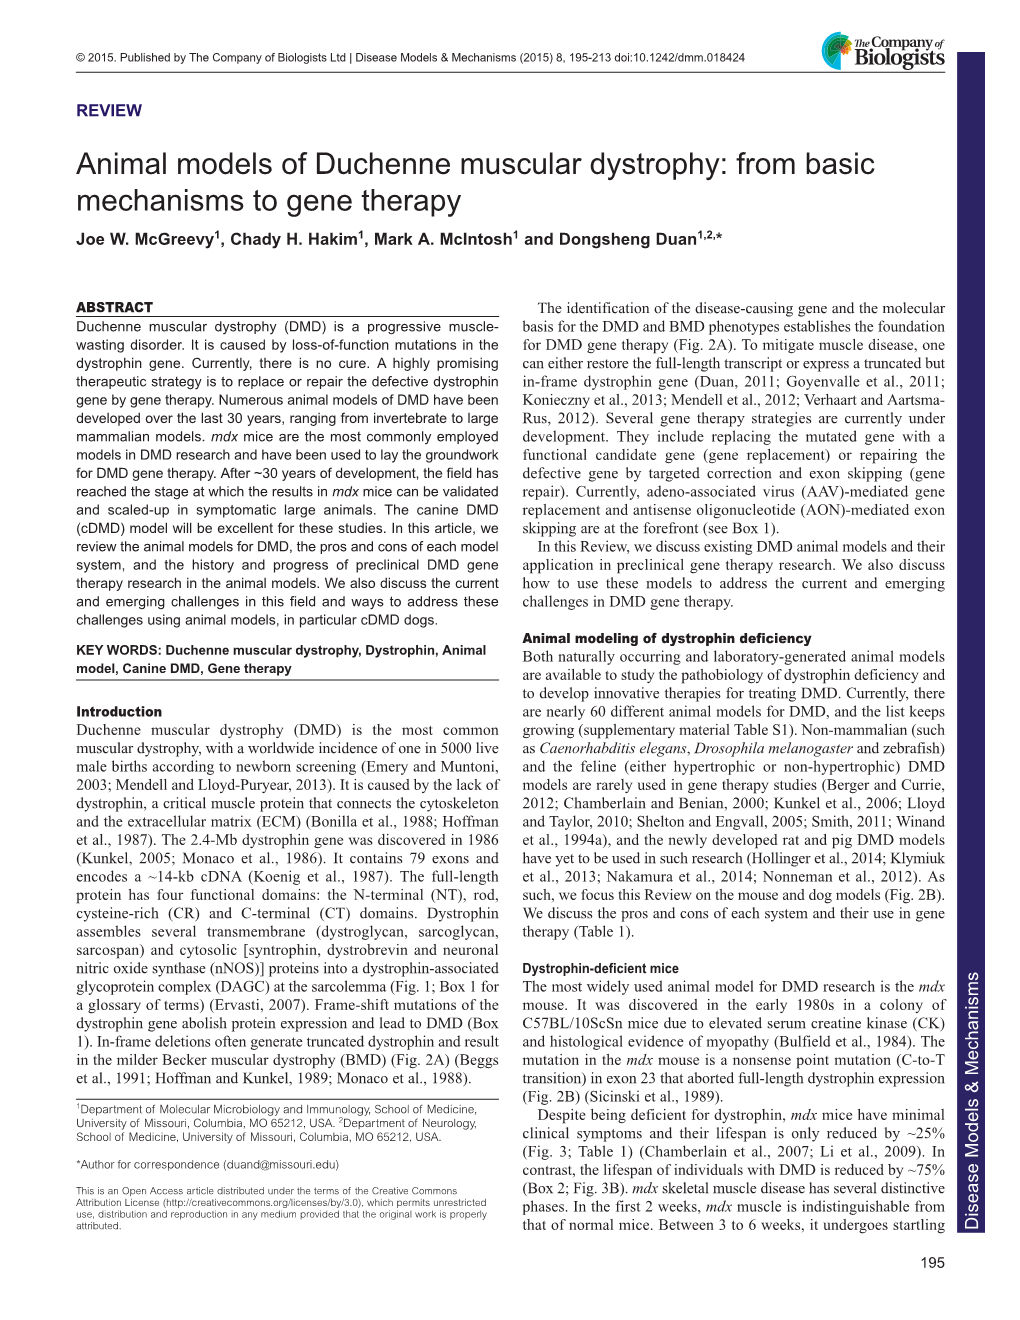 Animal Models of Duchenne Muscular Dystrophy: from Basic Mechanisms to Gene Therapy Joe W